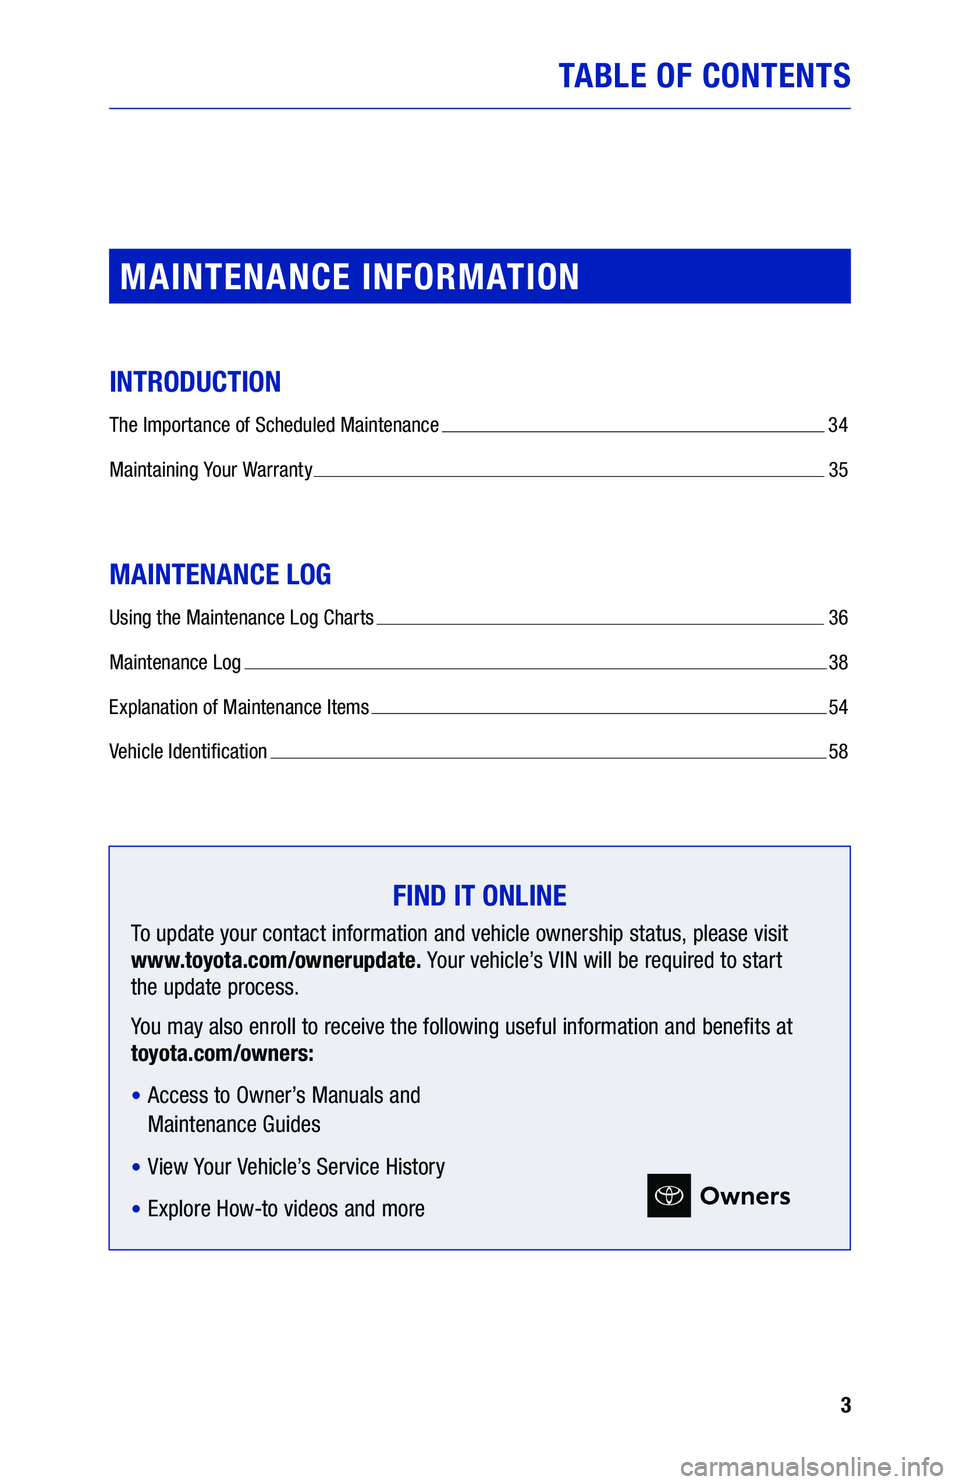 TOYOTA RAV4 2020  Warranties & Maintenance Guides (in English) 3
TABLE OF CONTENTS
MAINTENANCE INFORMATION
INTRODUCTION
The Importance of Scheduled Maintenance  34
Maintaining Your Warranty 
 35
MAINTENANCE LOG
Using the Maintenance Log Charts  36
Maintenance Log